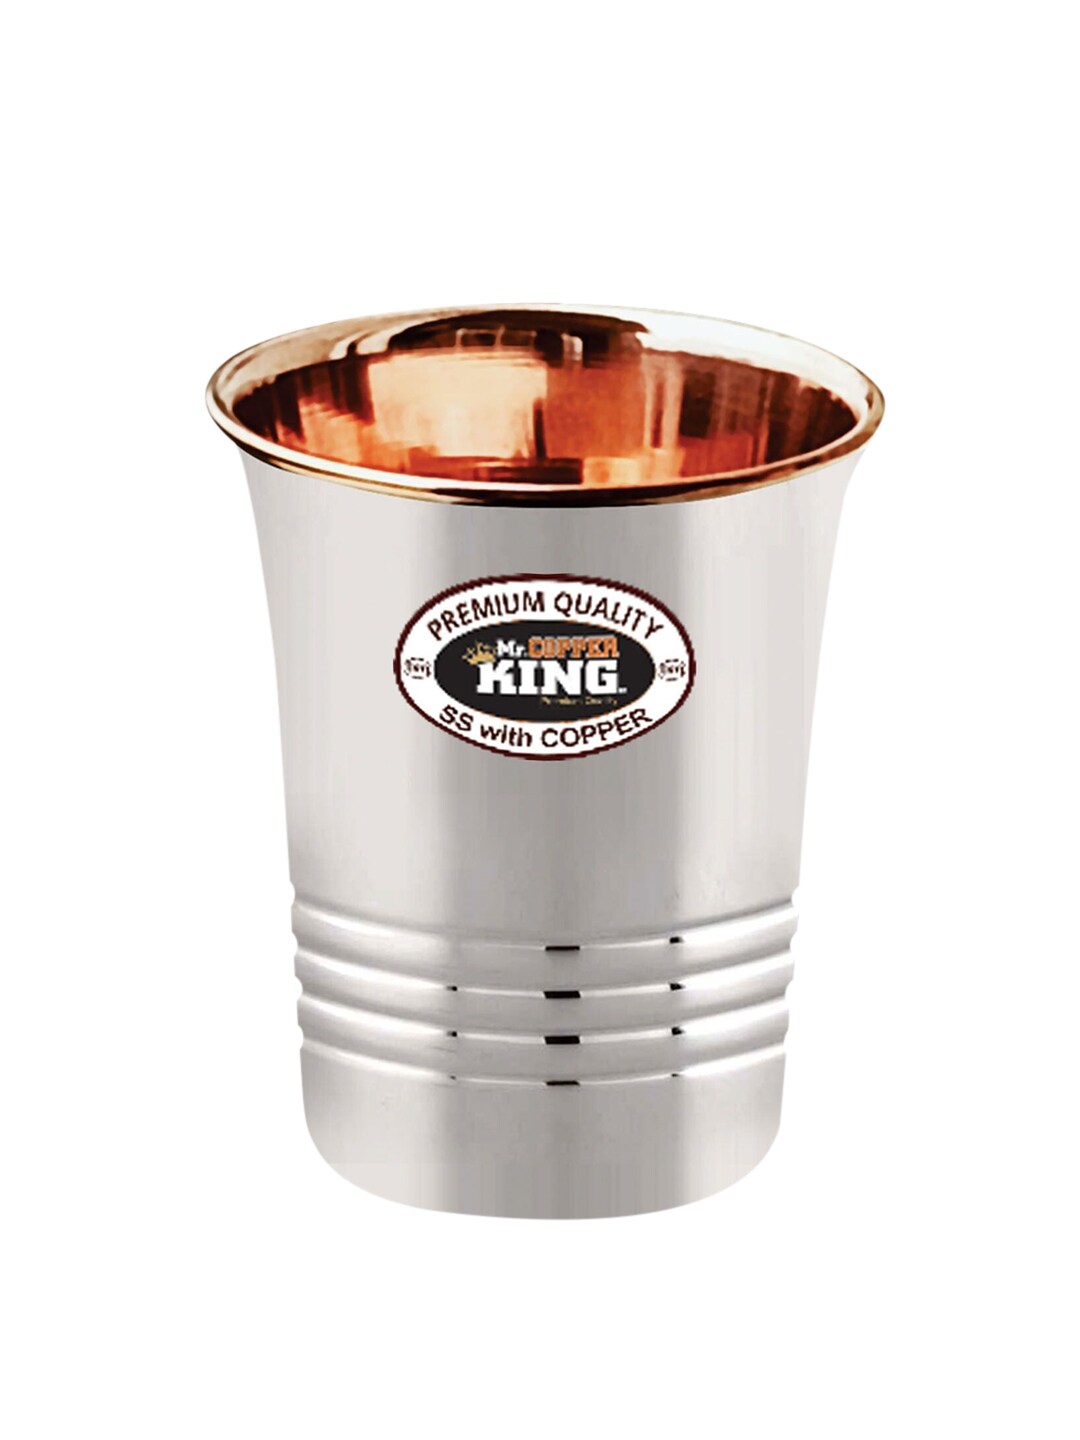 MR. COPPER KING Copper-Toned & Silver-Toned Textured Tumbler Price in India